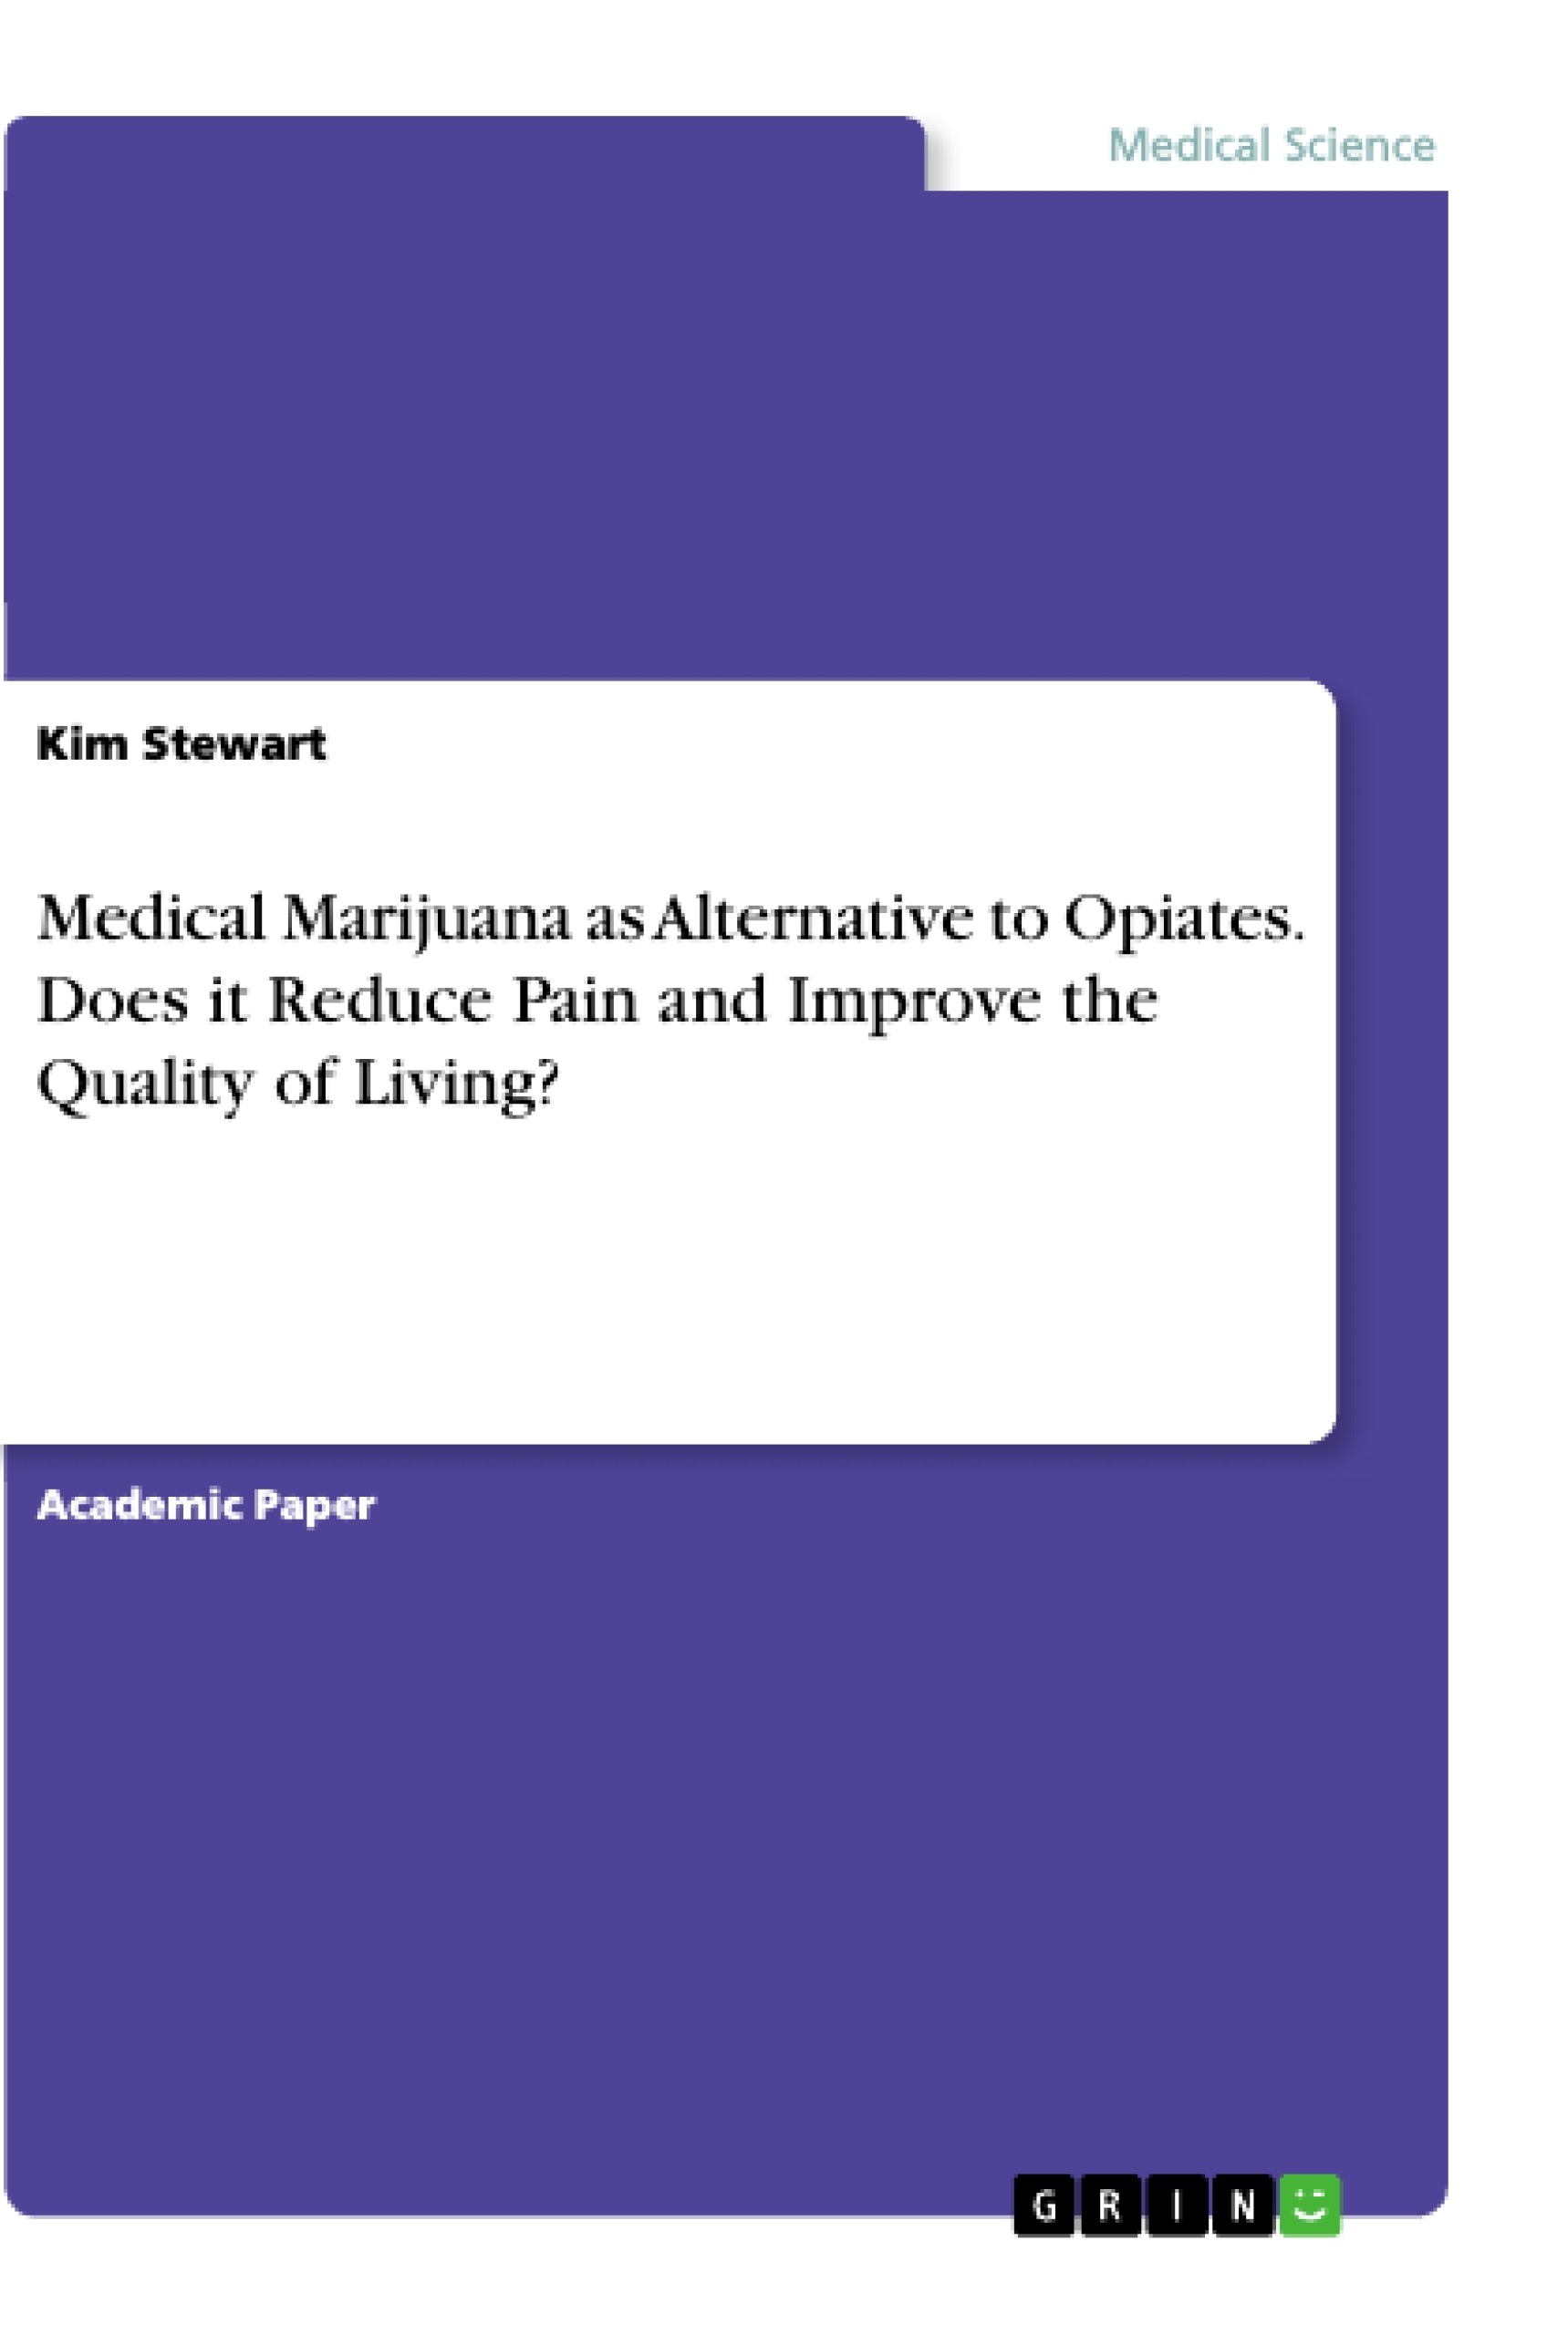 Title: Medical Marijuana as Alternative to Opiates. Does it Reduce Pain and Improve the Quality of Living?